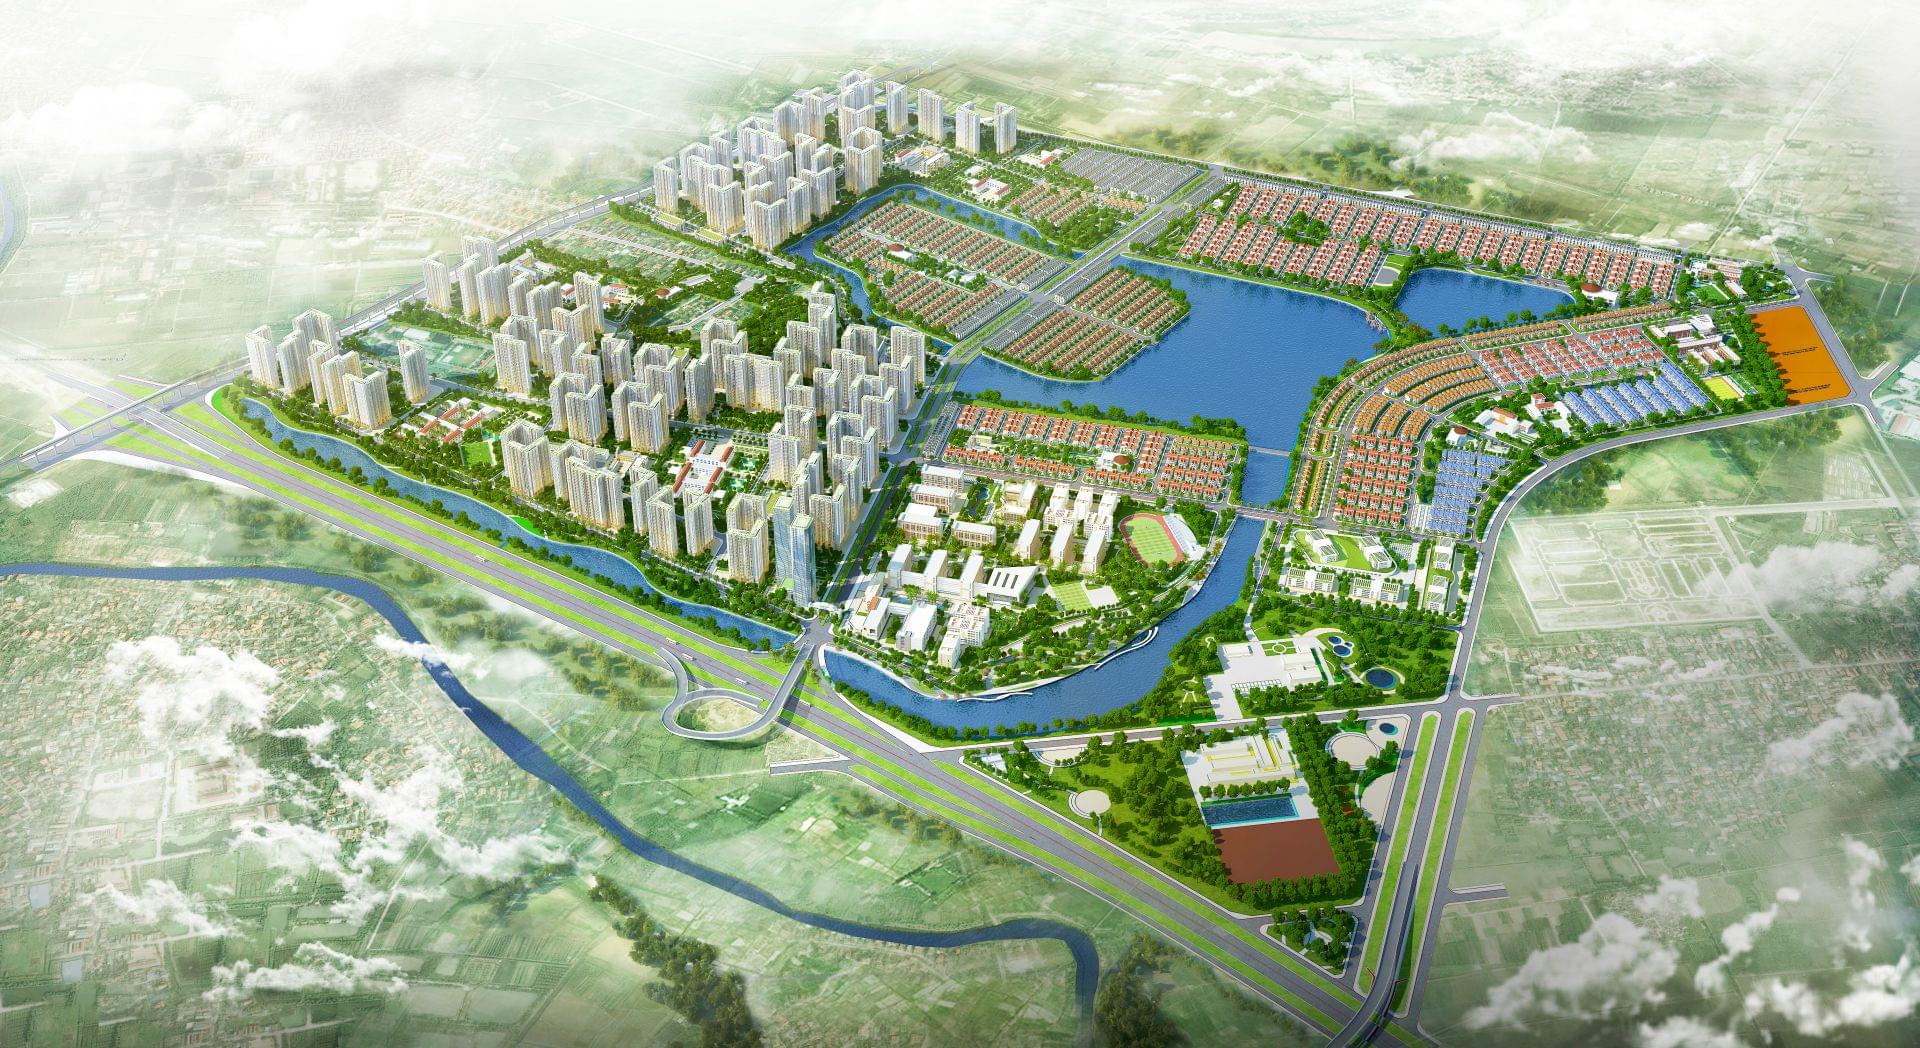 Detailed planning of 1/500 RATE OF GIA LAM URBAN AREA